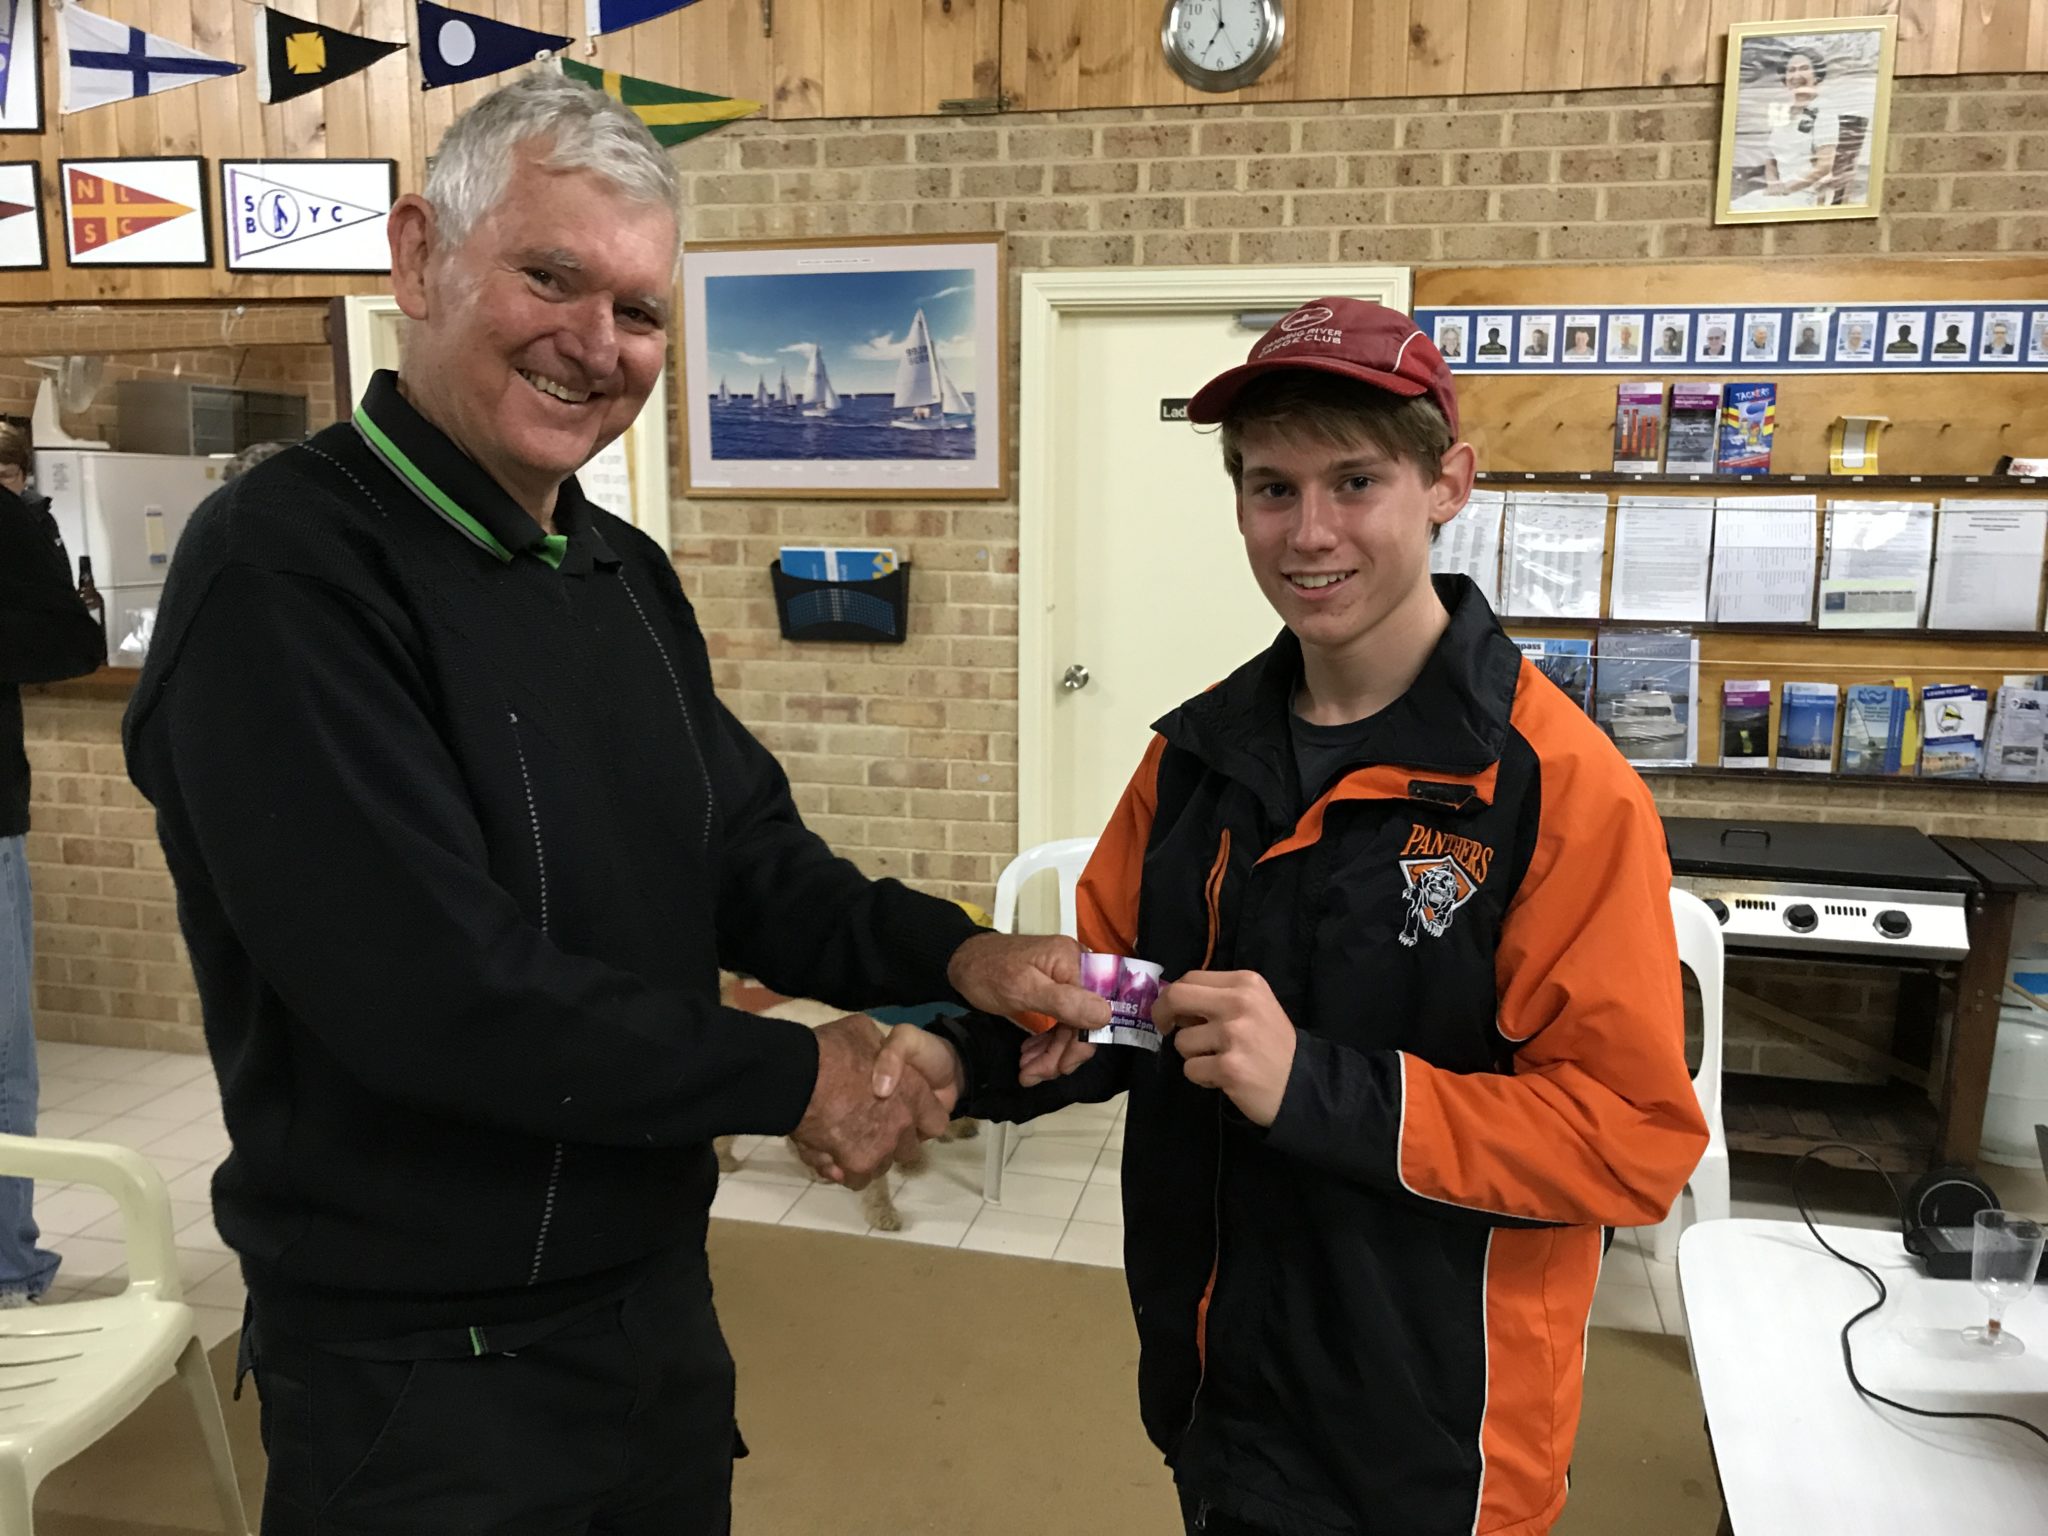 Tues 26th September 2017 : Tonight’s photo shows club member Tom Green presenting Jerry with a movie voucher